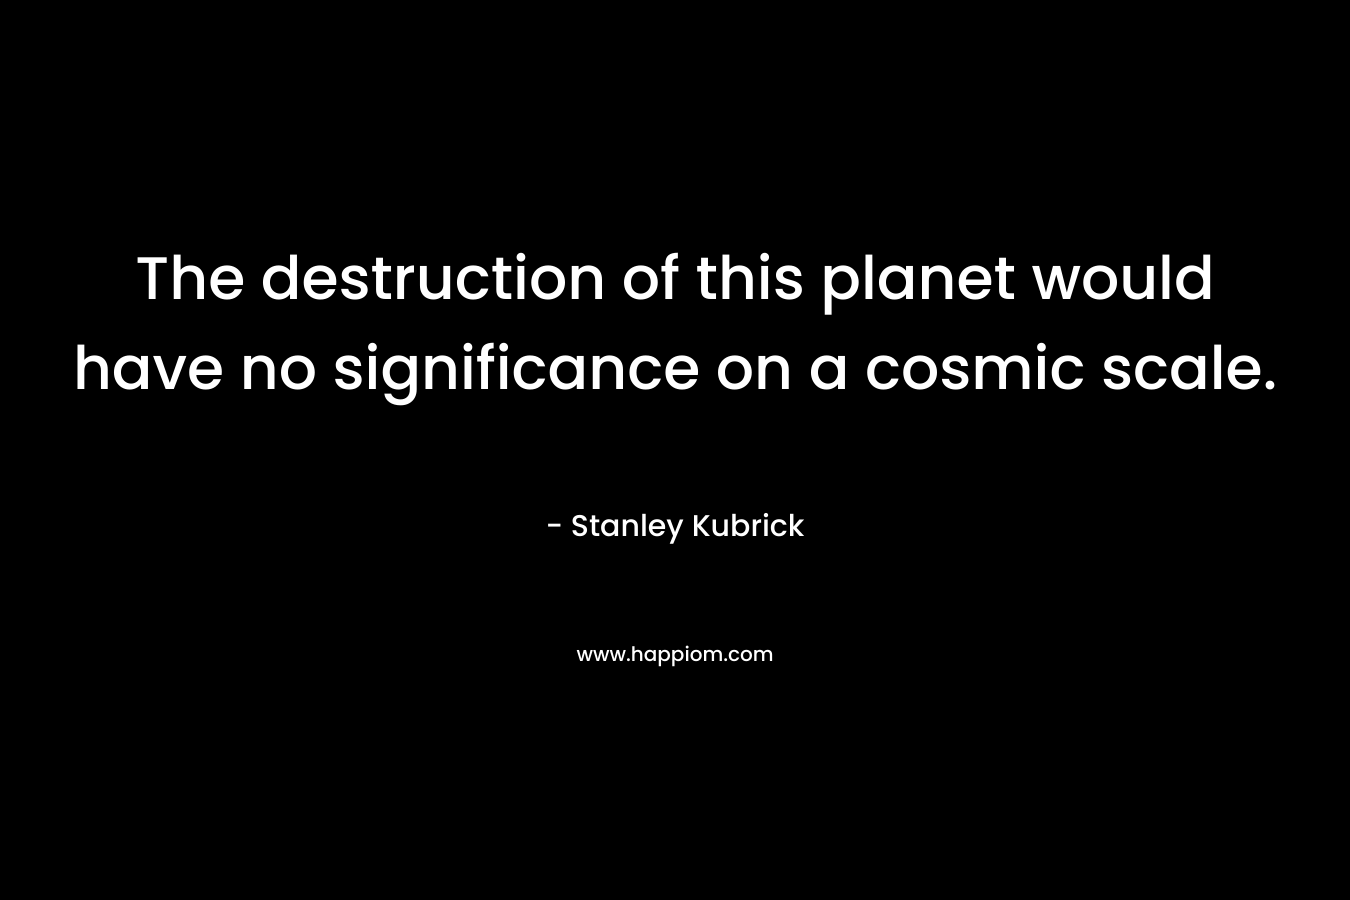 The destruction of this planet would have no significance on a cosmic scale. – Stanley Kubrick